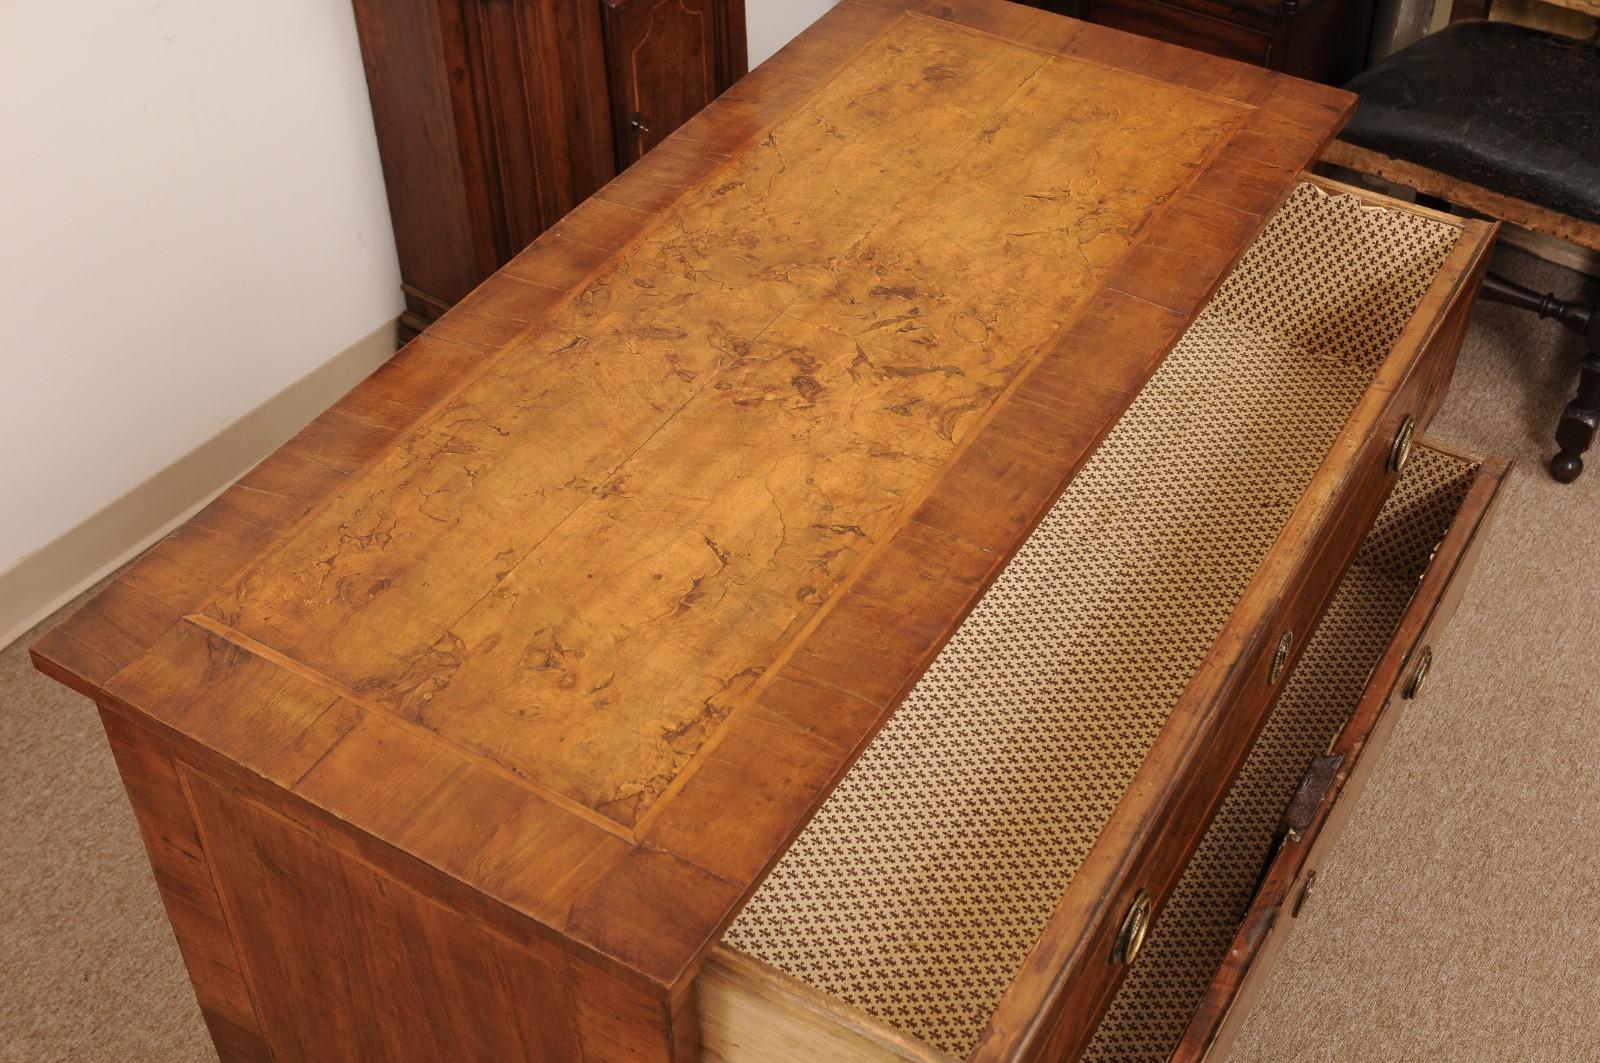 Late 18th Century Italian Walnut 2 Drawer Commode with Inlay, ca. 1790 For Sale 5